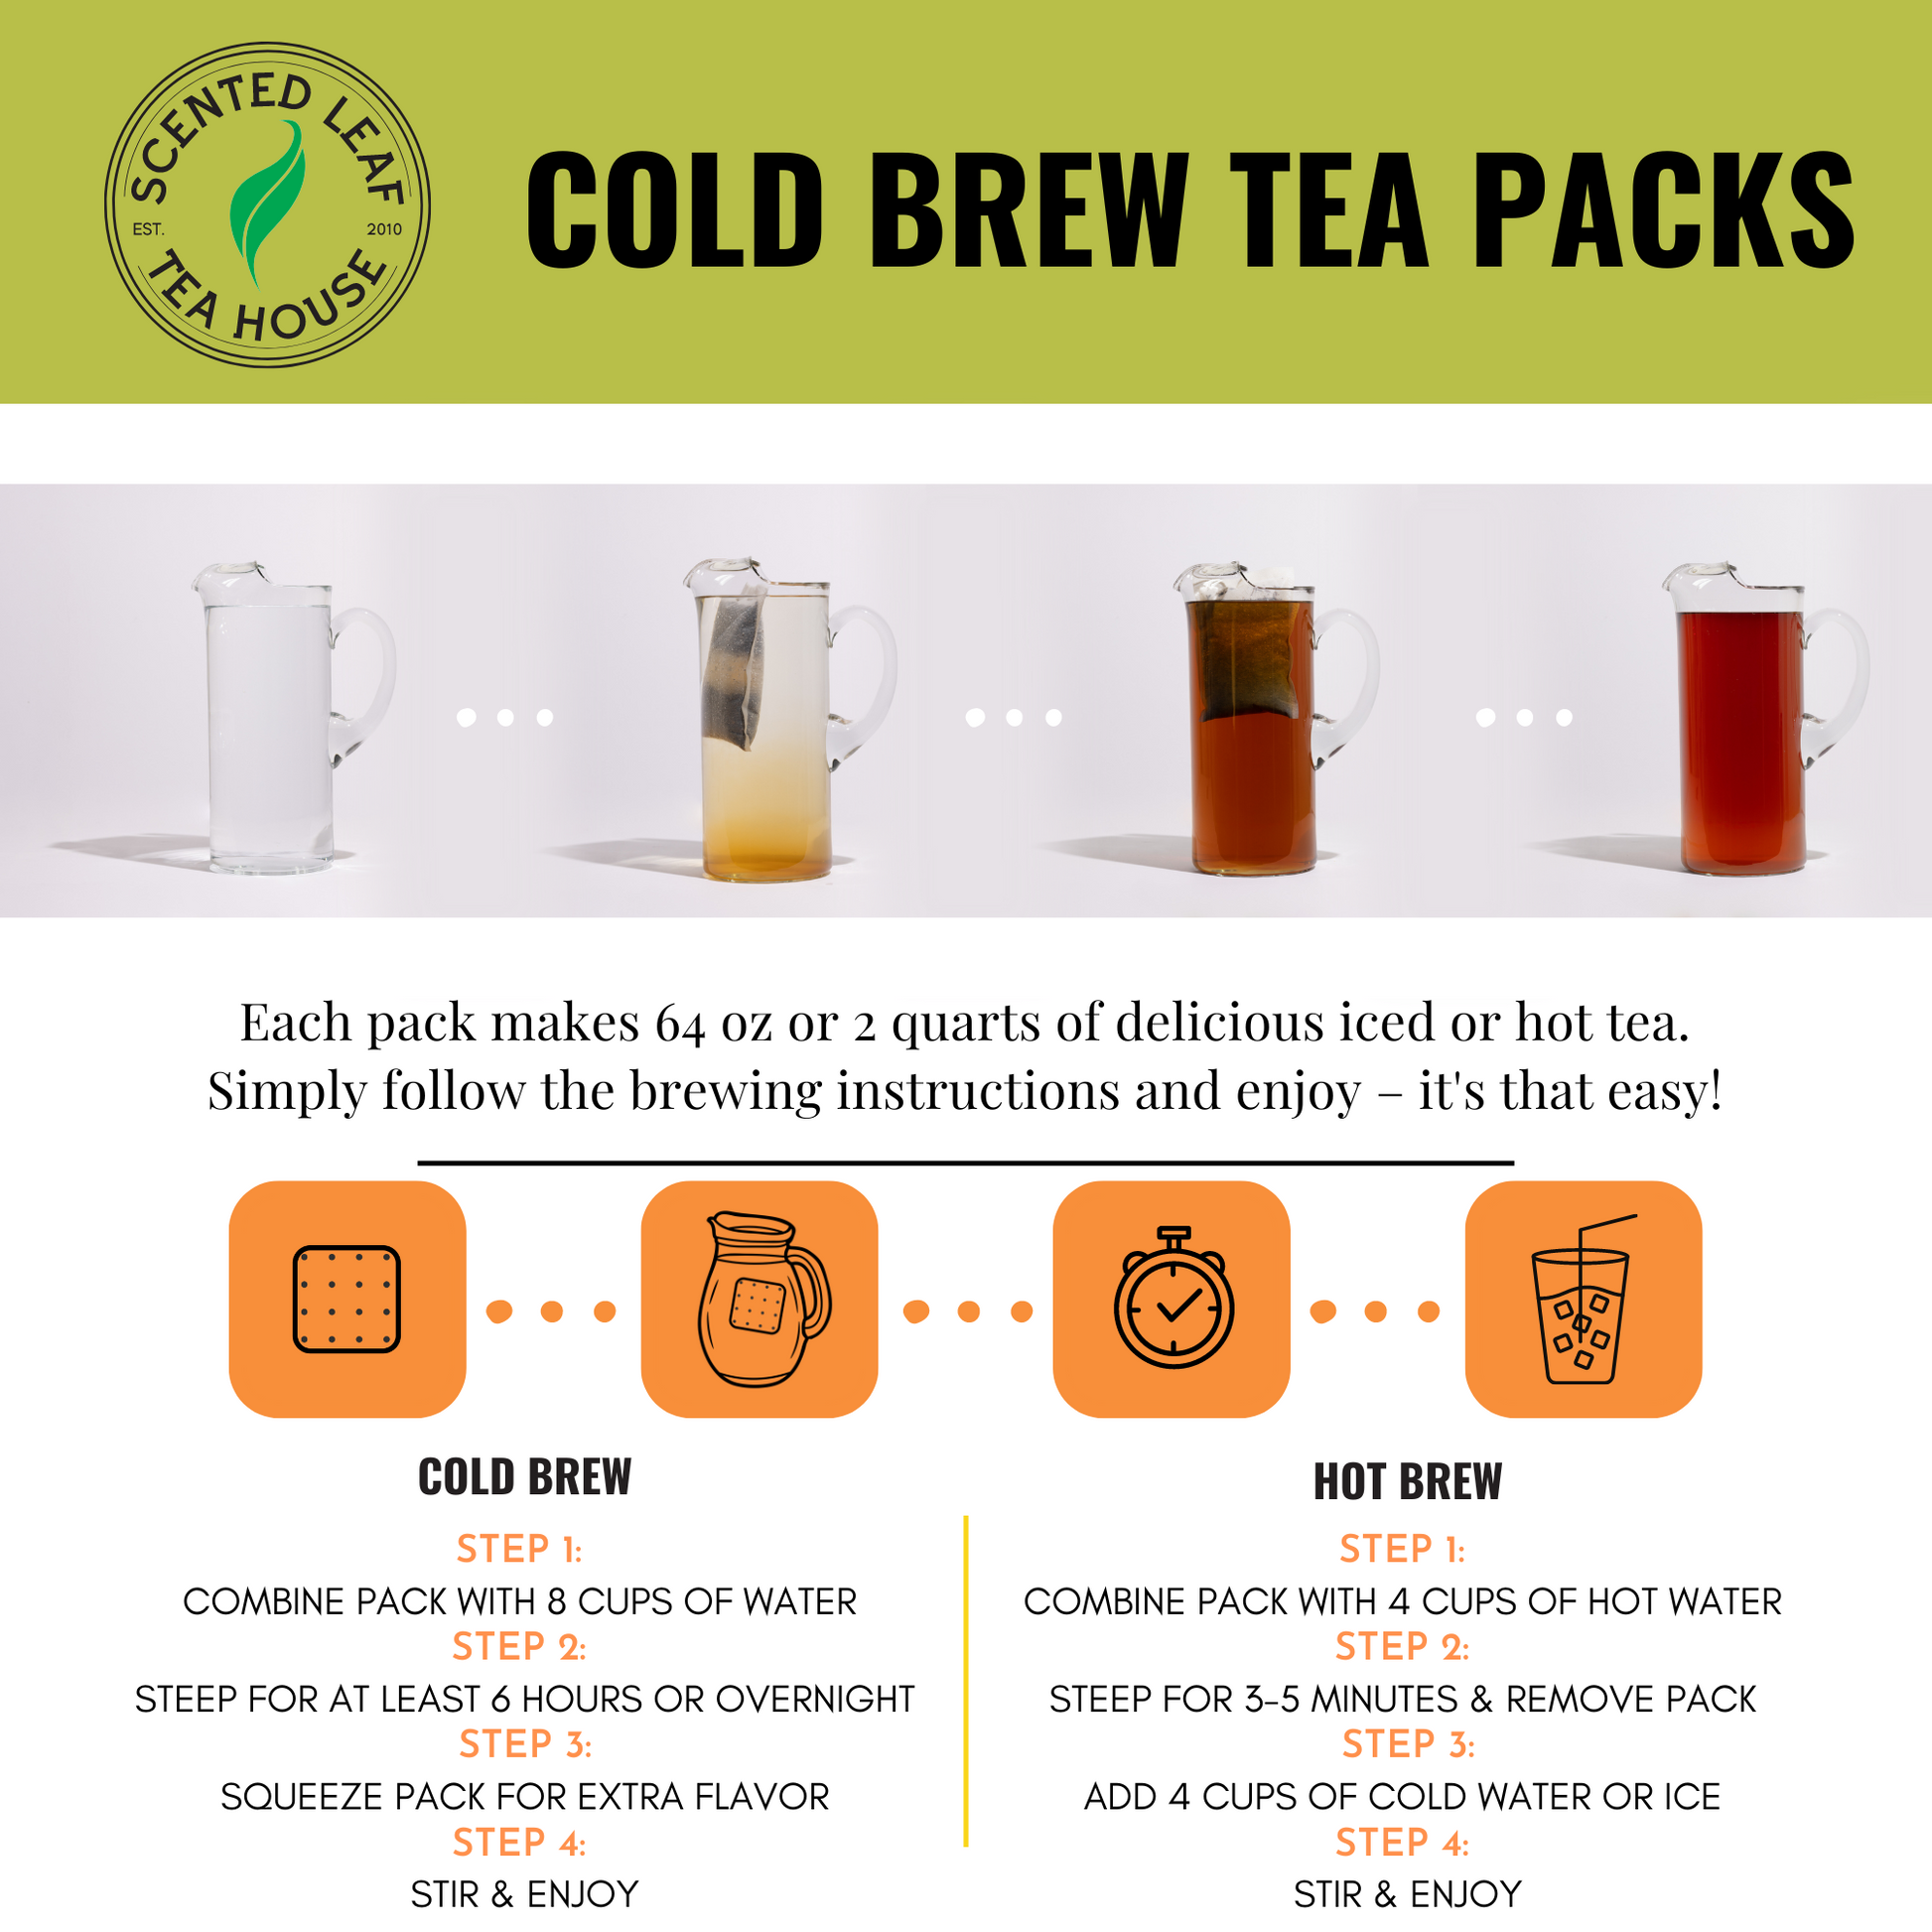 How to Make Iced Tea & Cold Brew